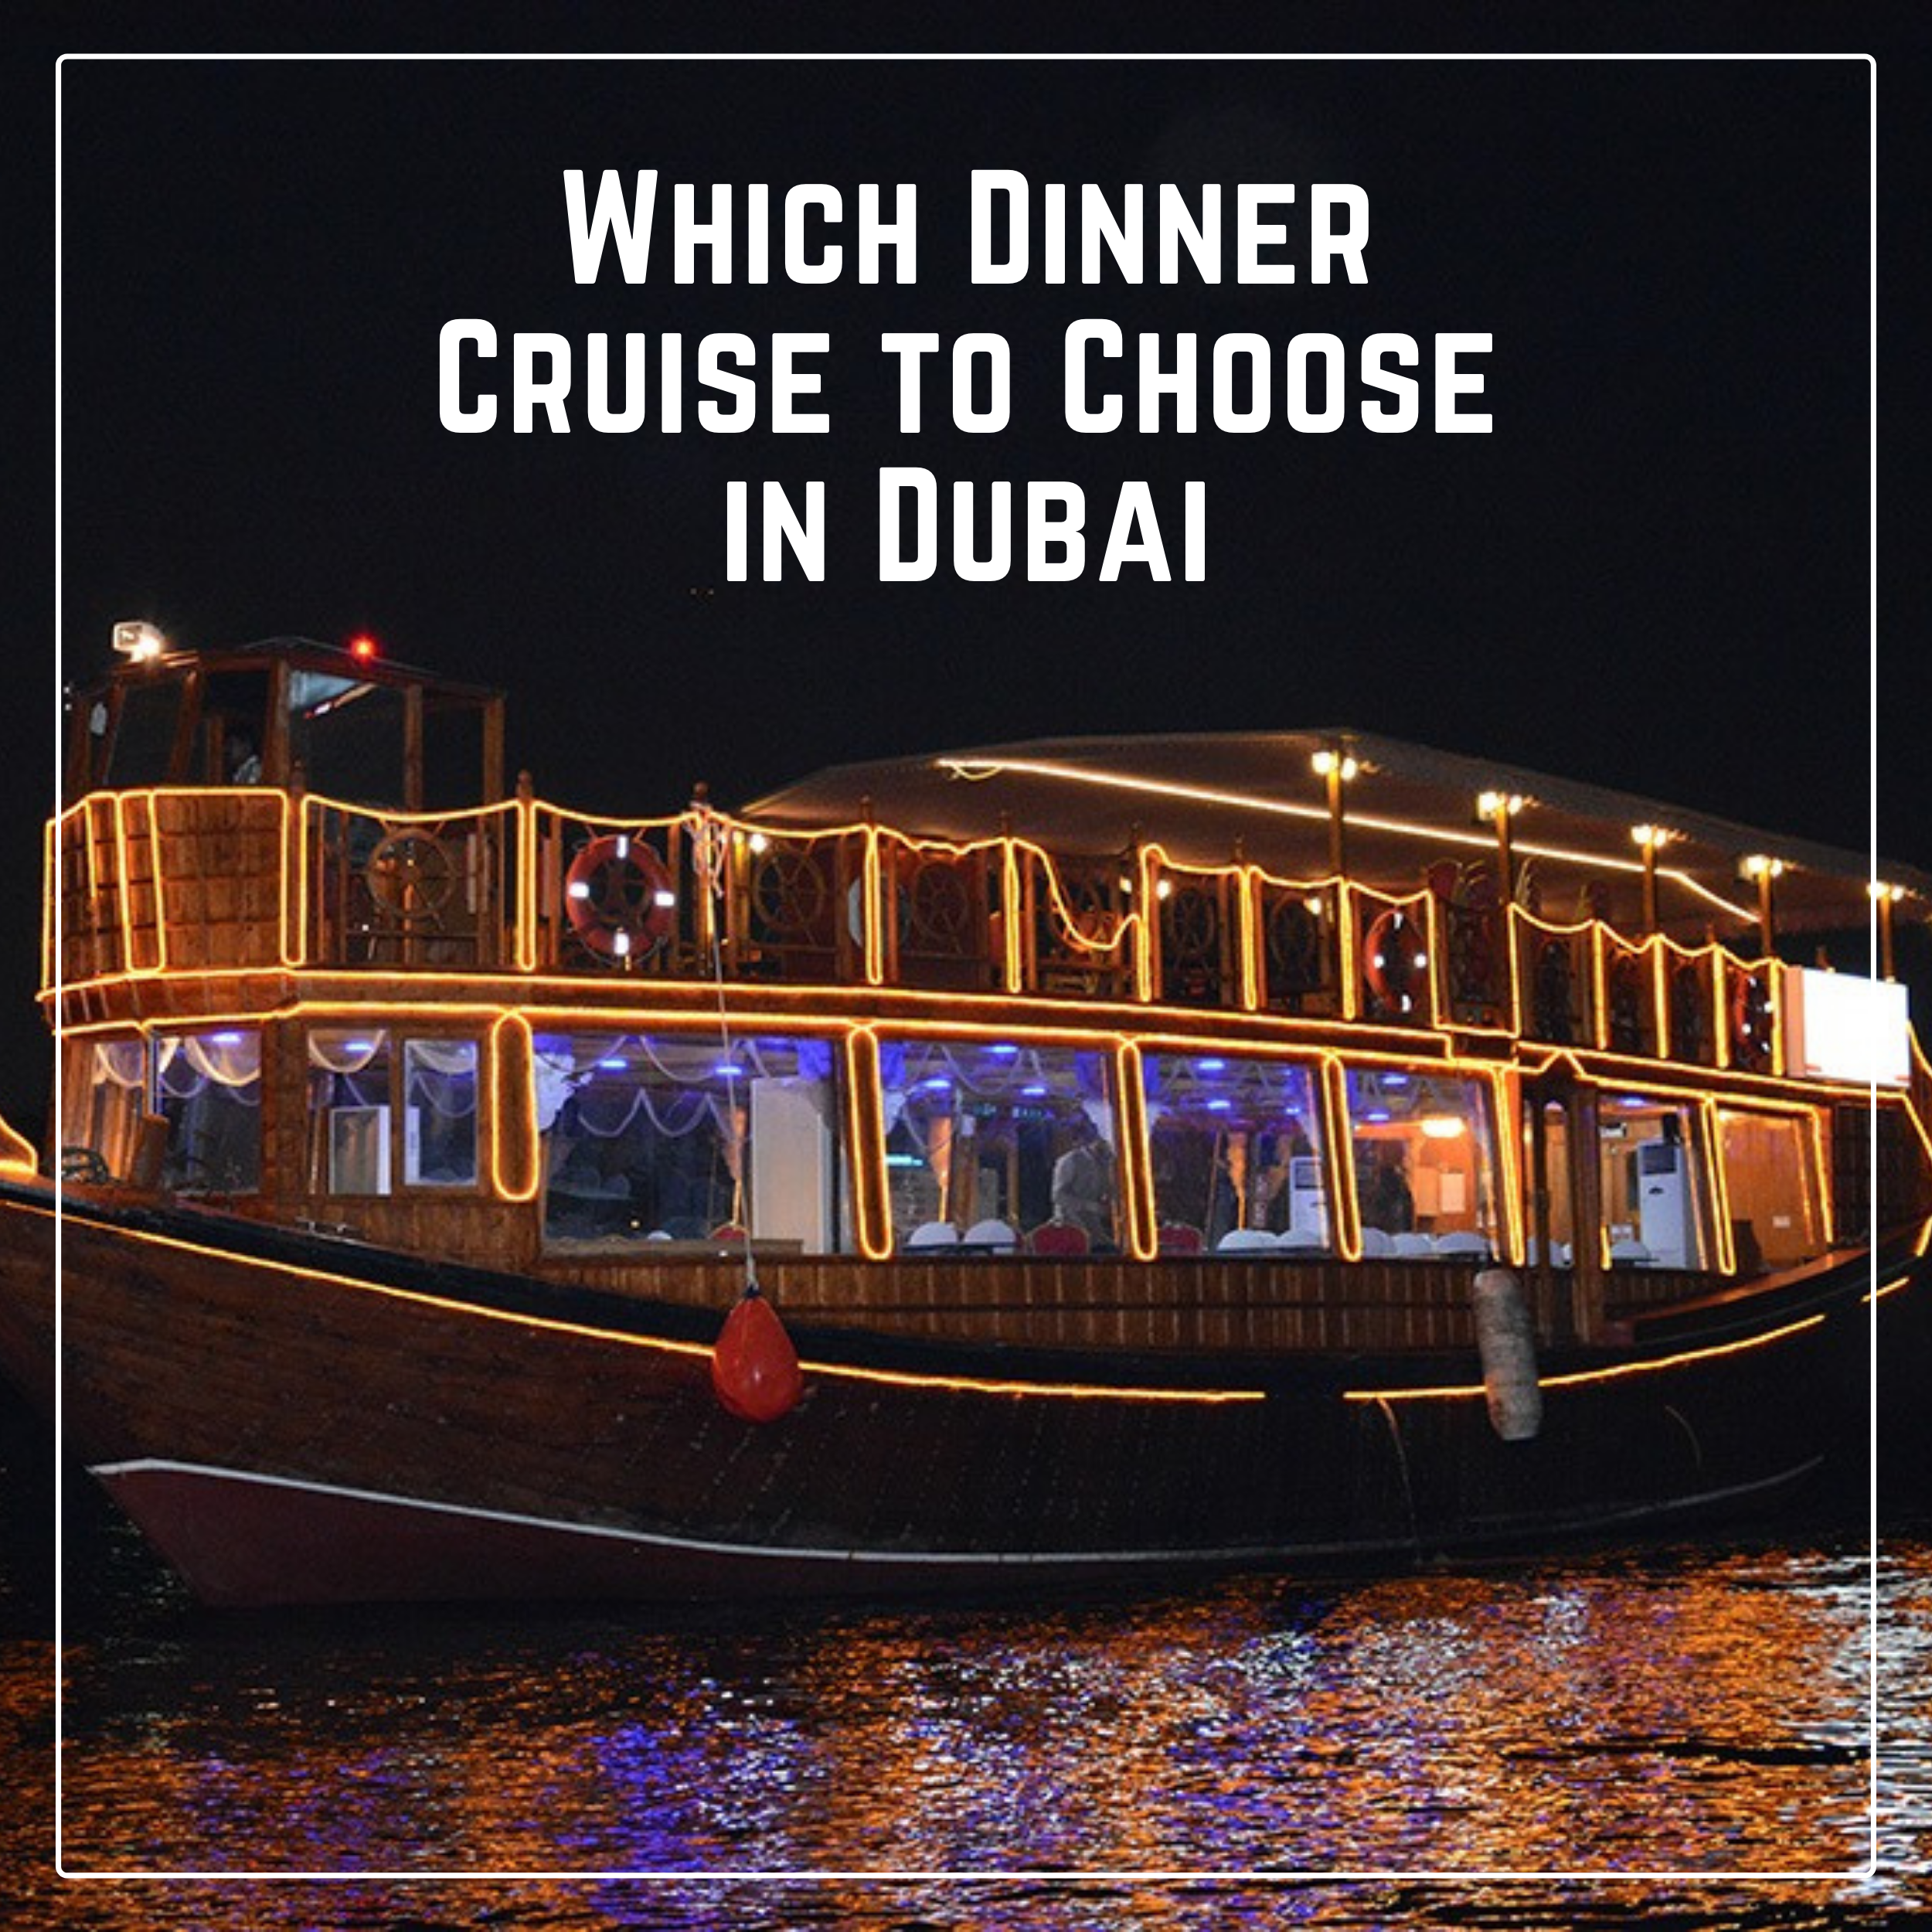 public/uploads/2022/01/Which-Dinner-Cruise-to-Choose-in-Dubai.png